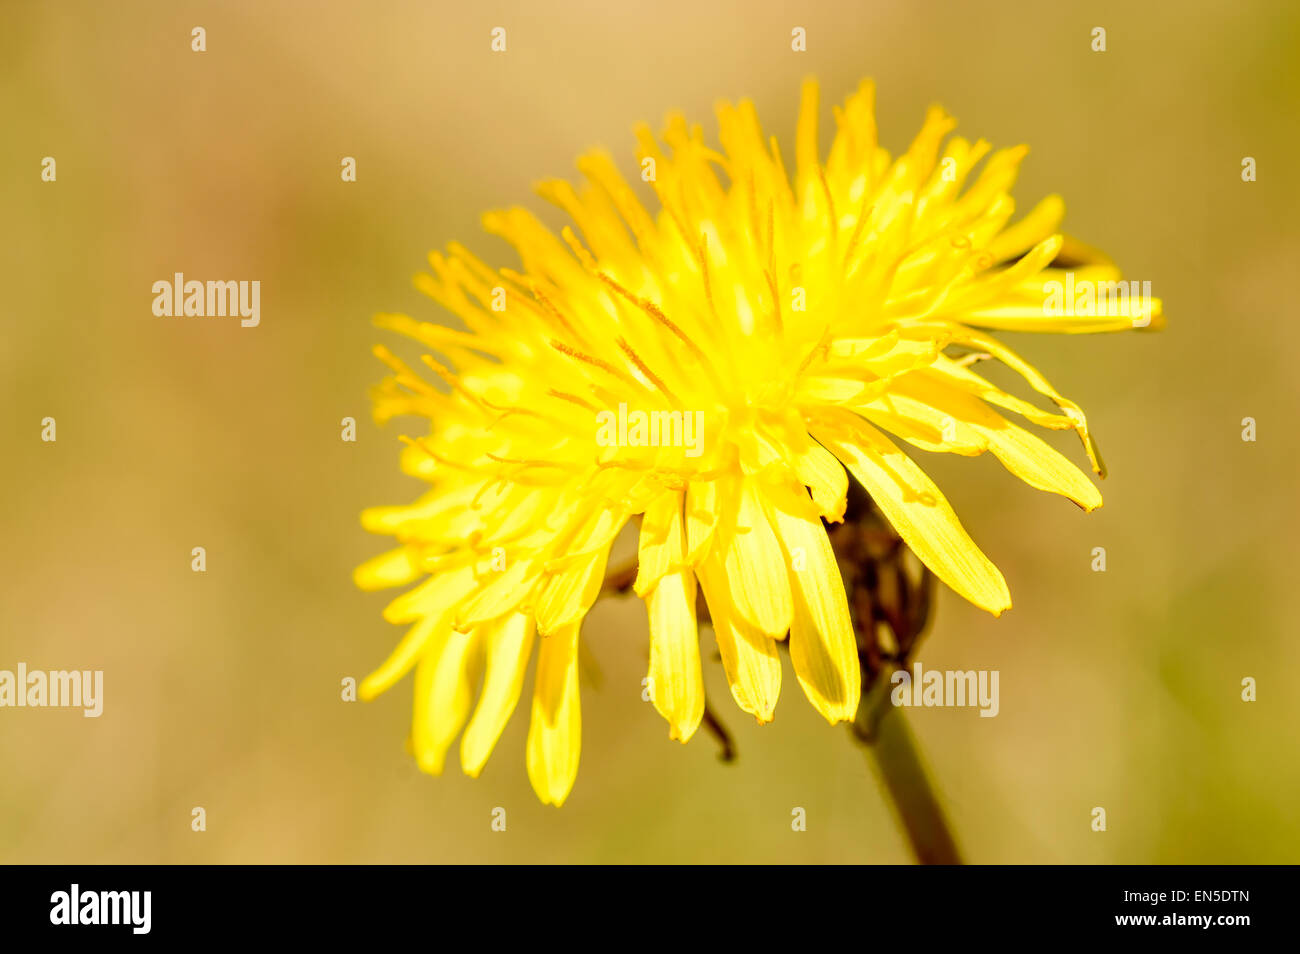 Common dandelion (Taraxacum officinale). Here seen close up with clean yellowish background. Stock Photo